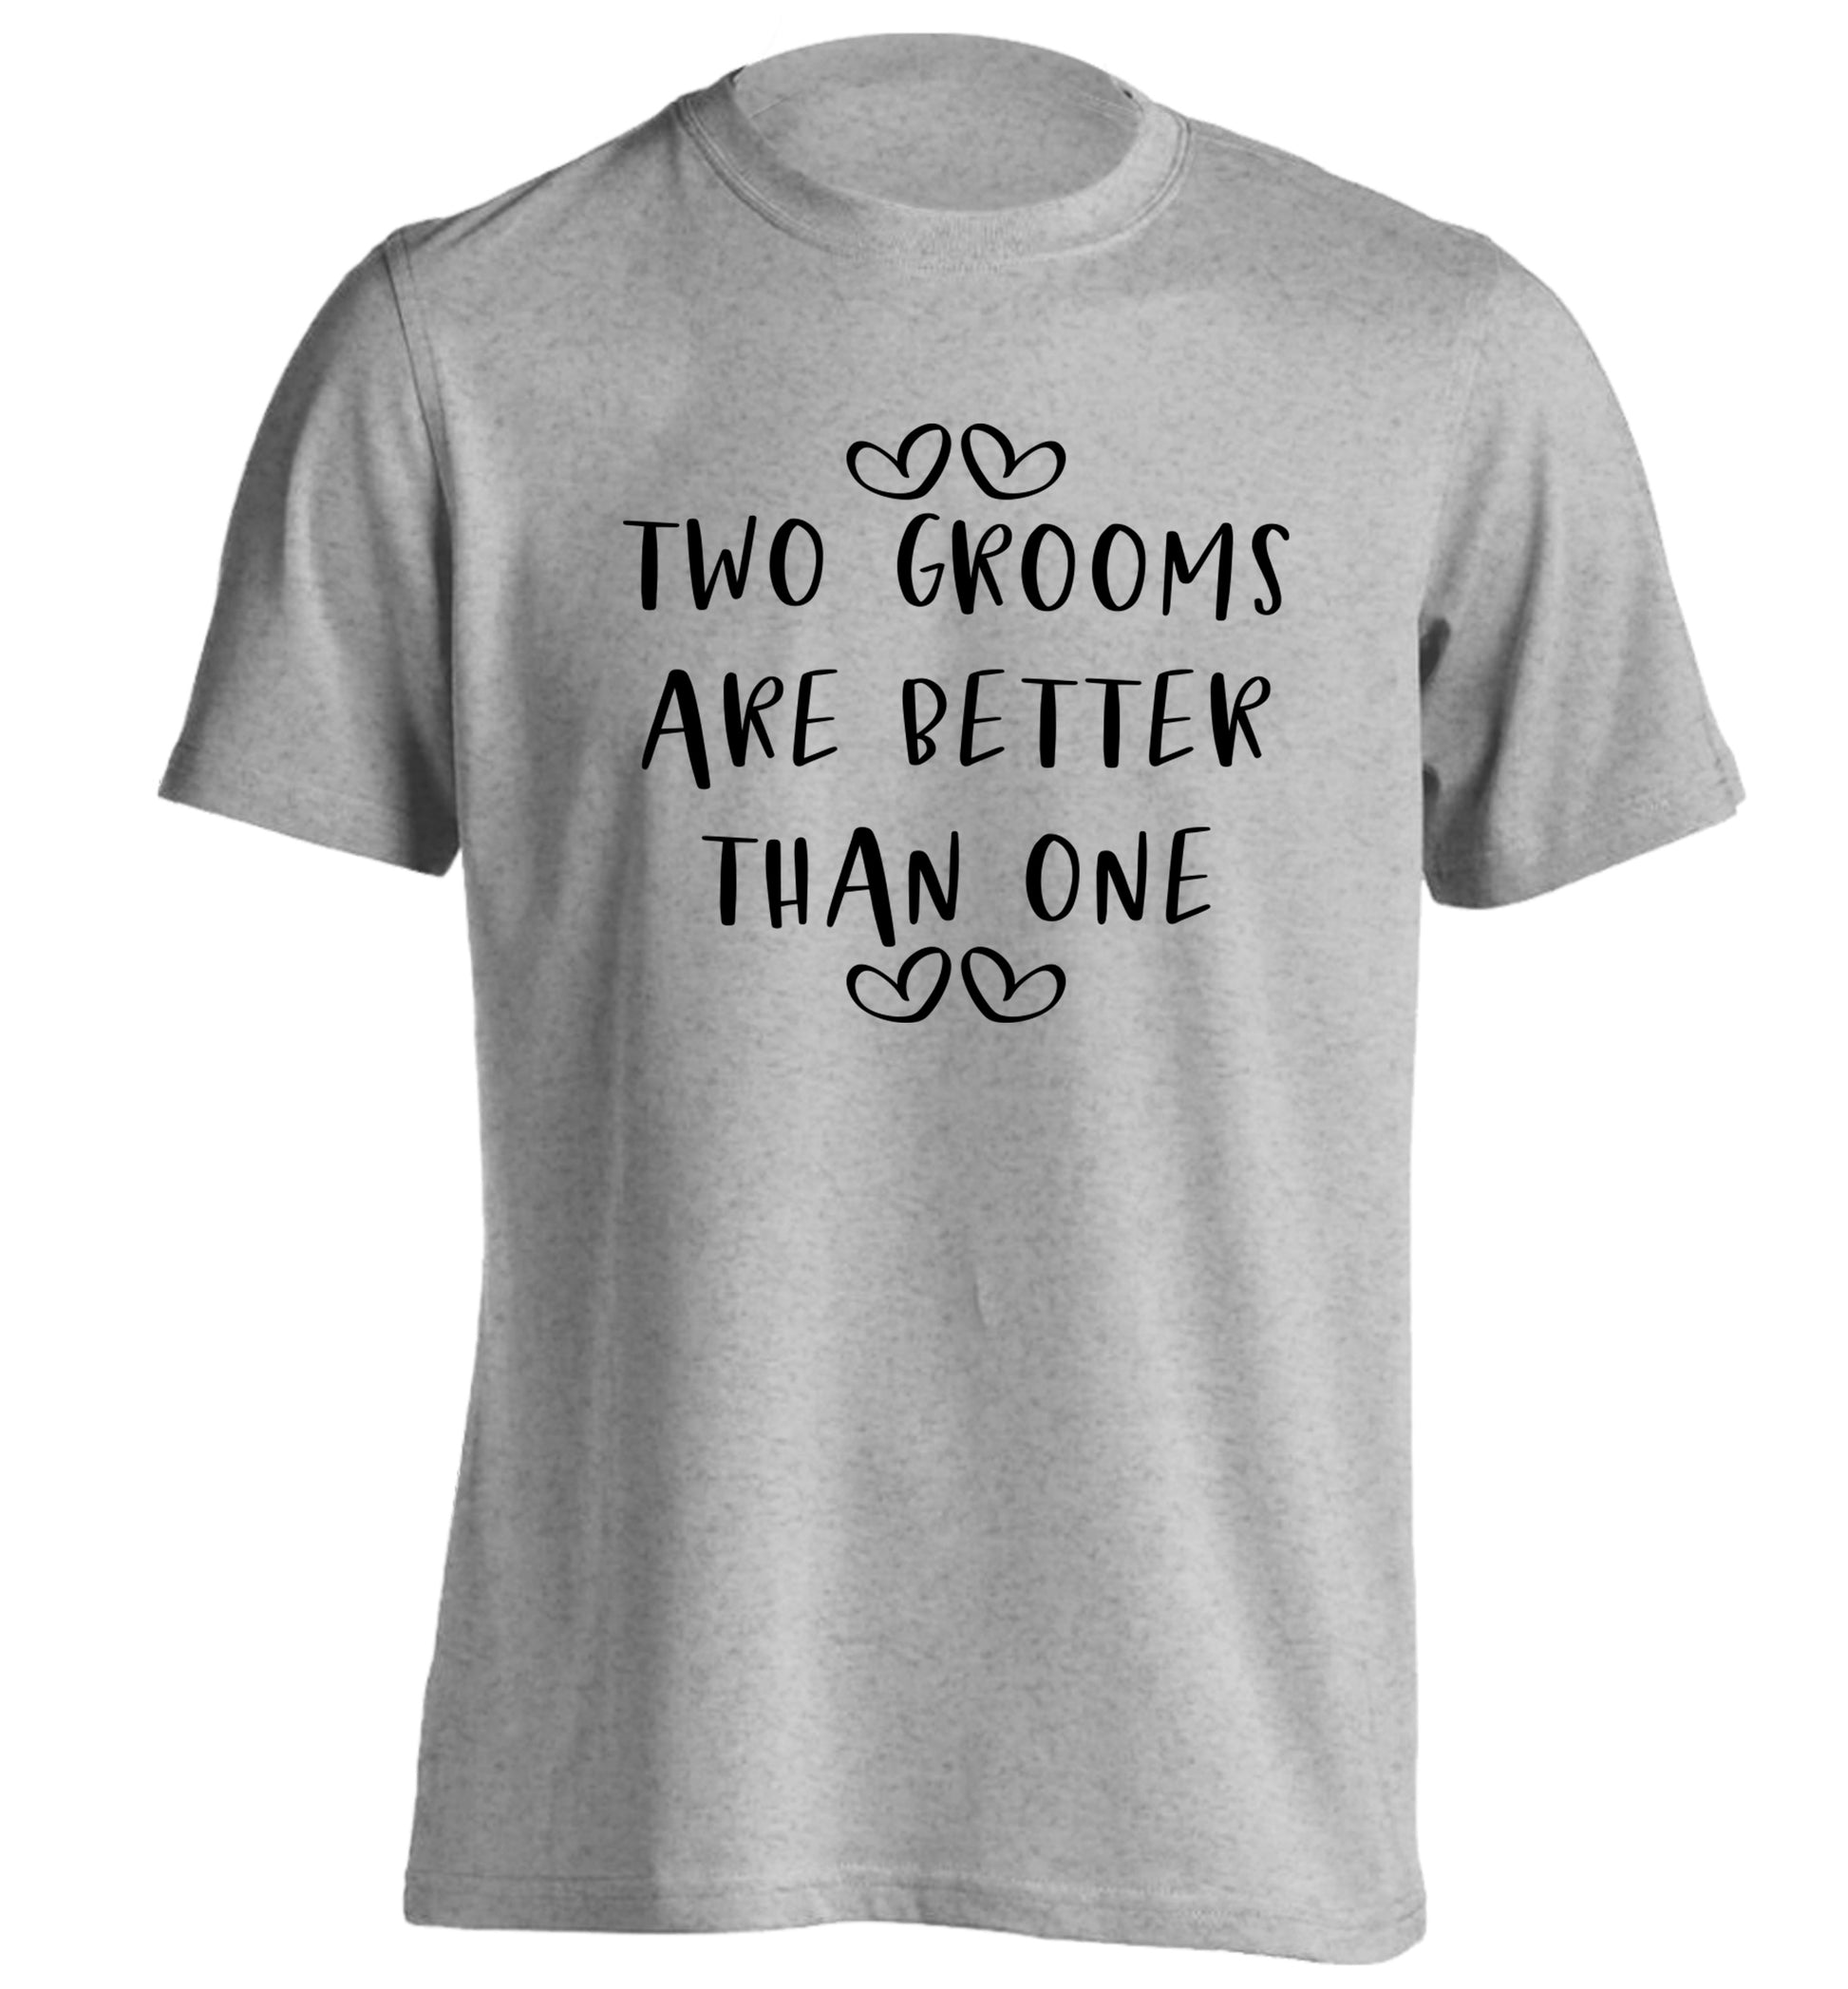 Two grooms are better than one adults unisex grey Tshirt 2XL